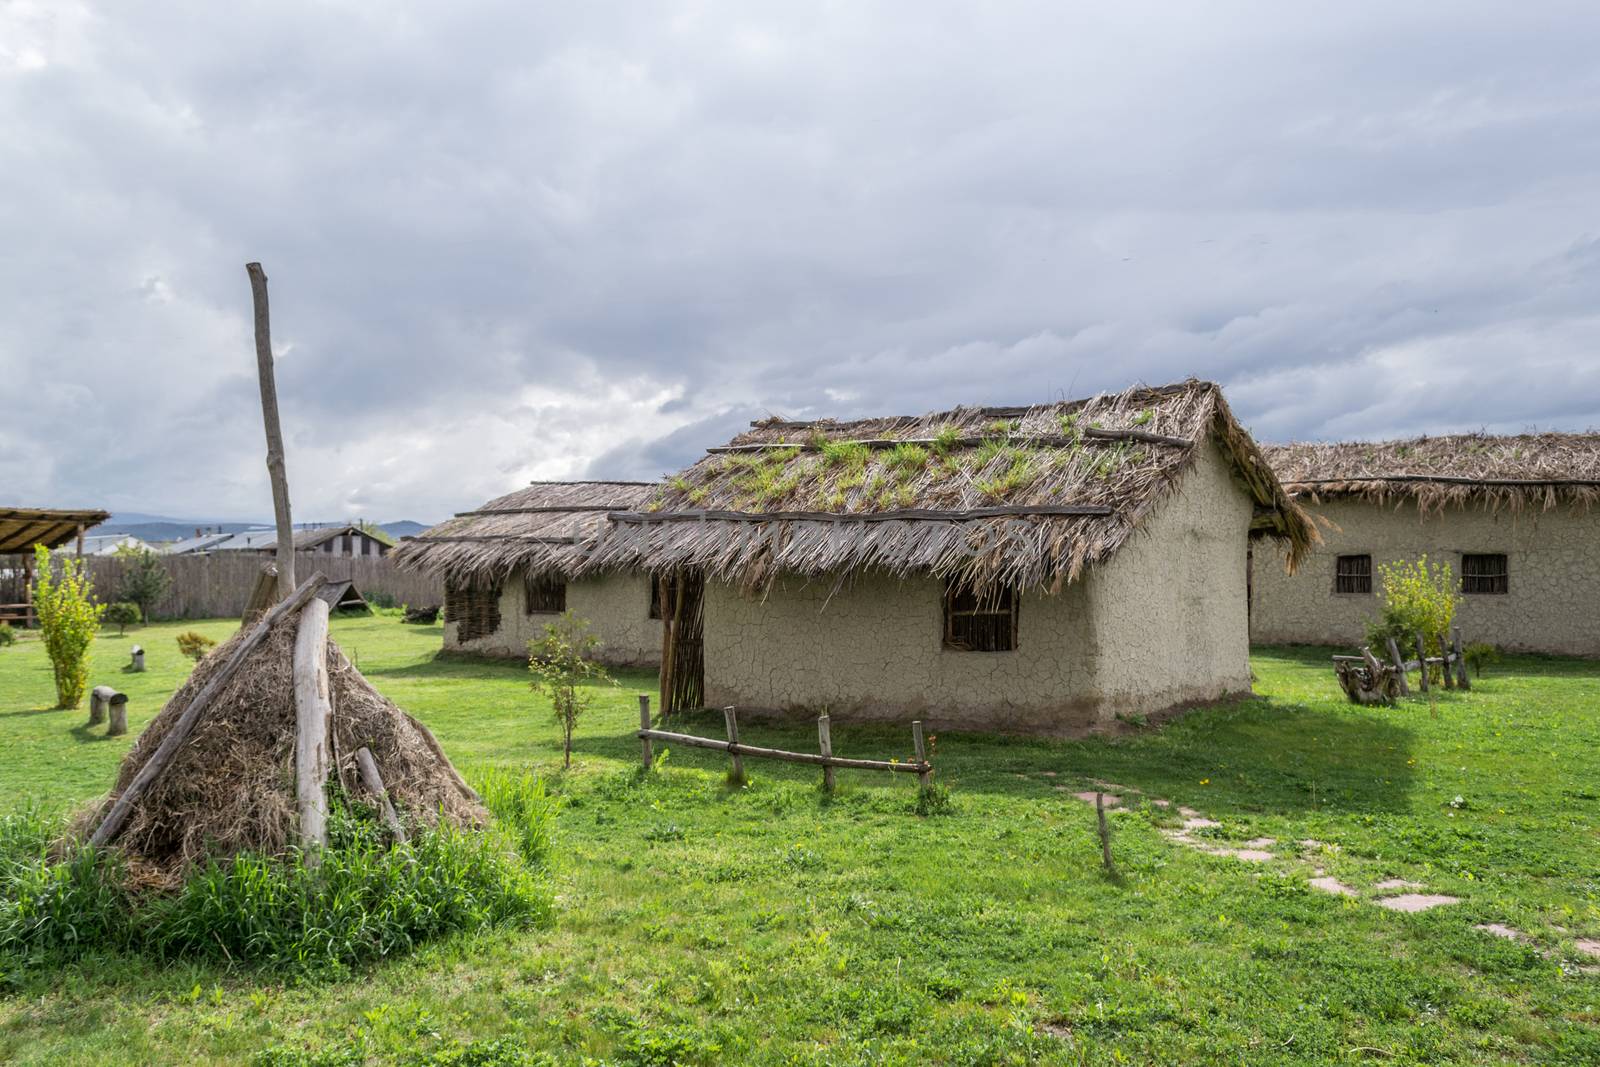 Ancient village, our ancestors used to live in